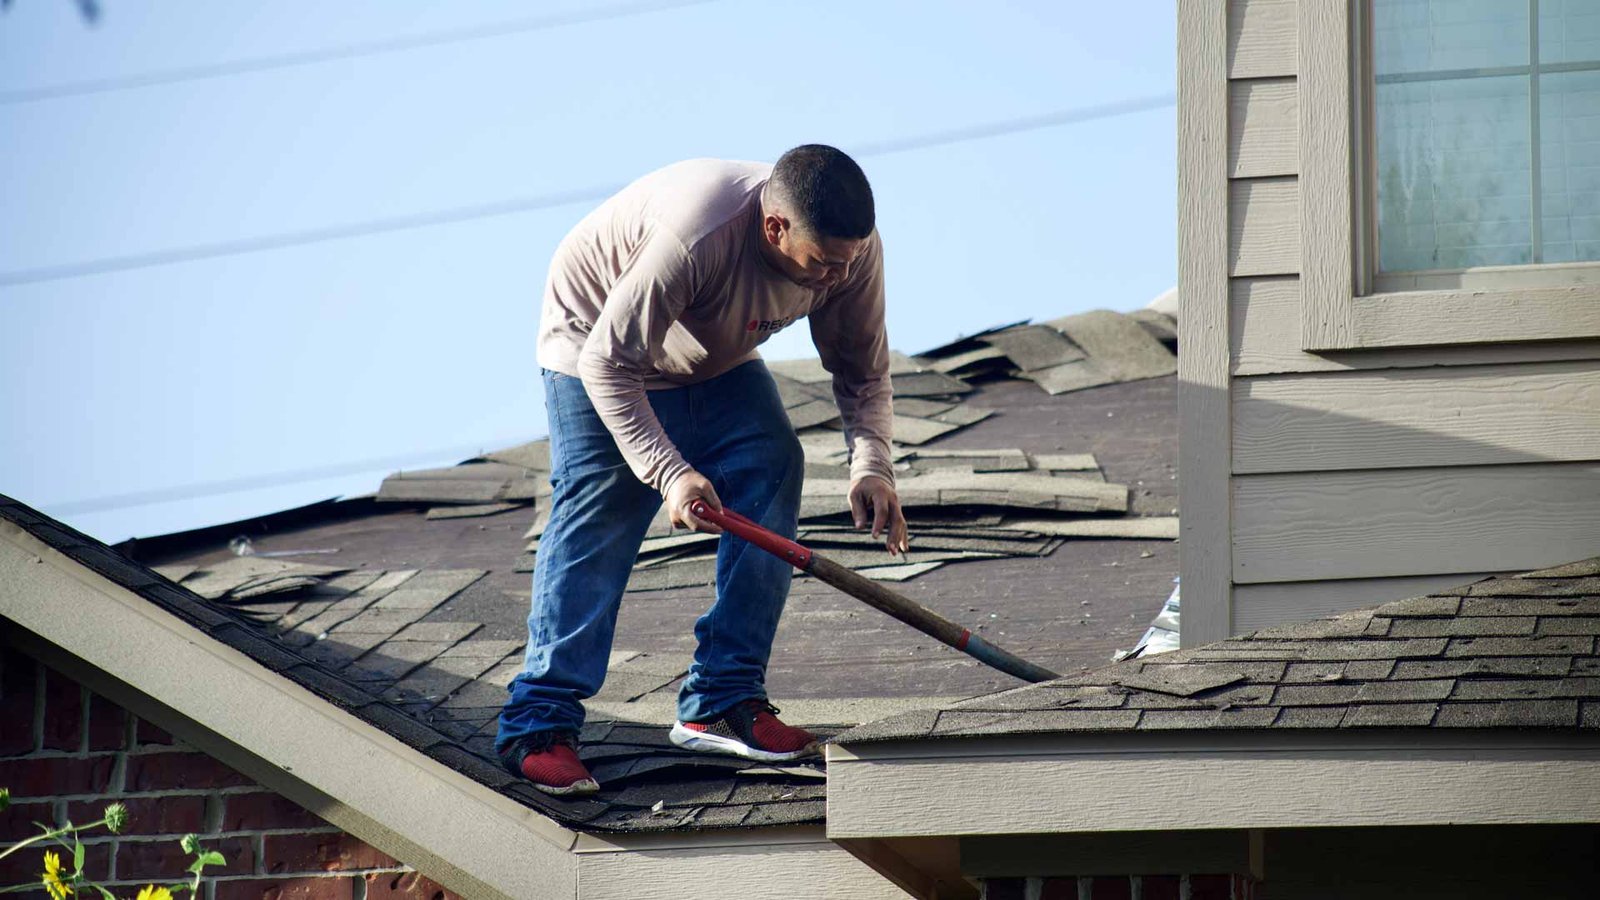 Free Roof Quote Service that Can Help You Get a Quote for a New Roof Fast